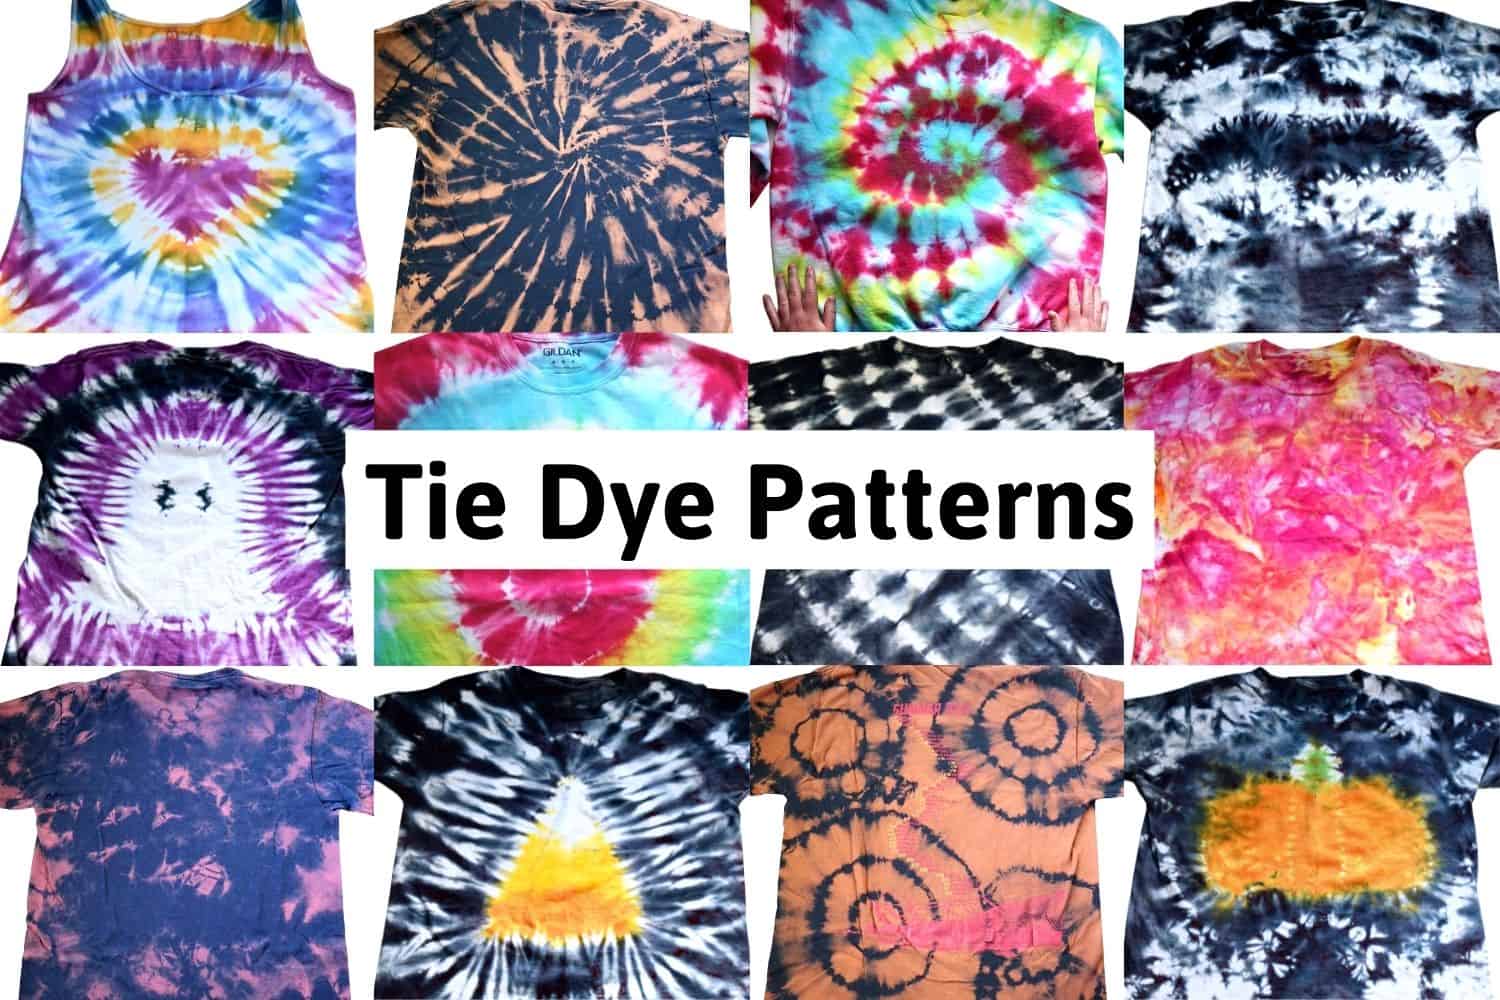 Blending Colors to Create Tie Dye Effects